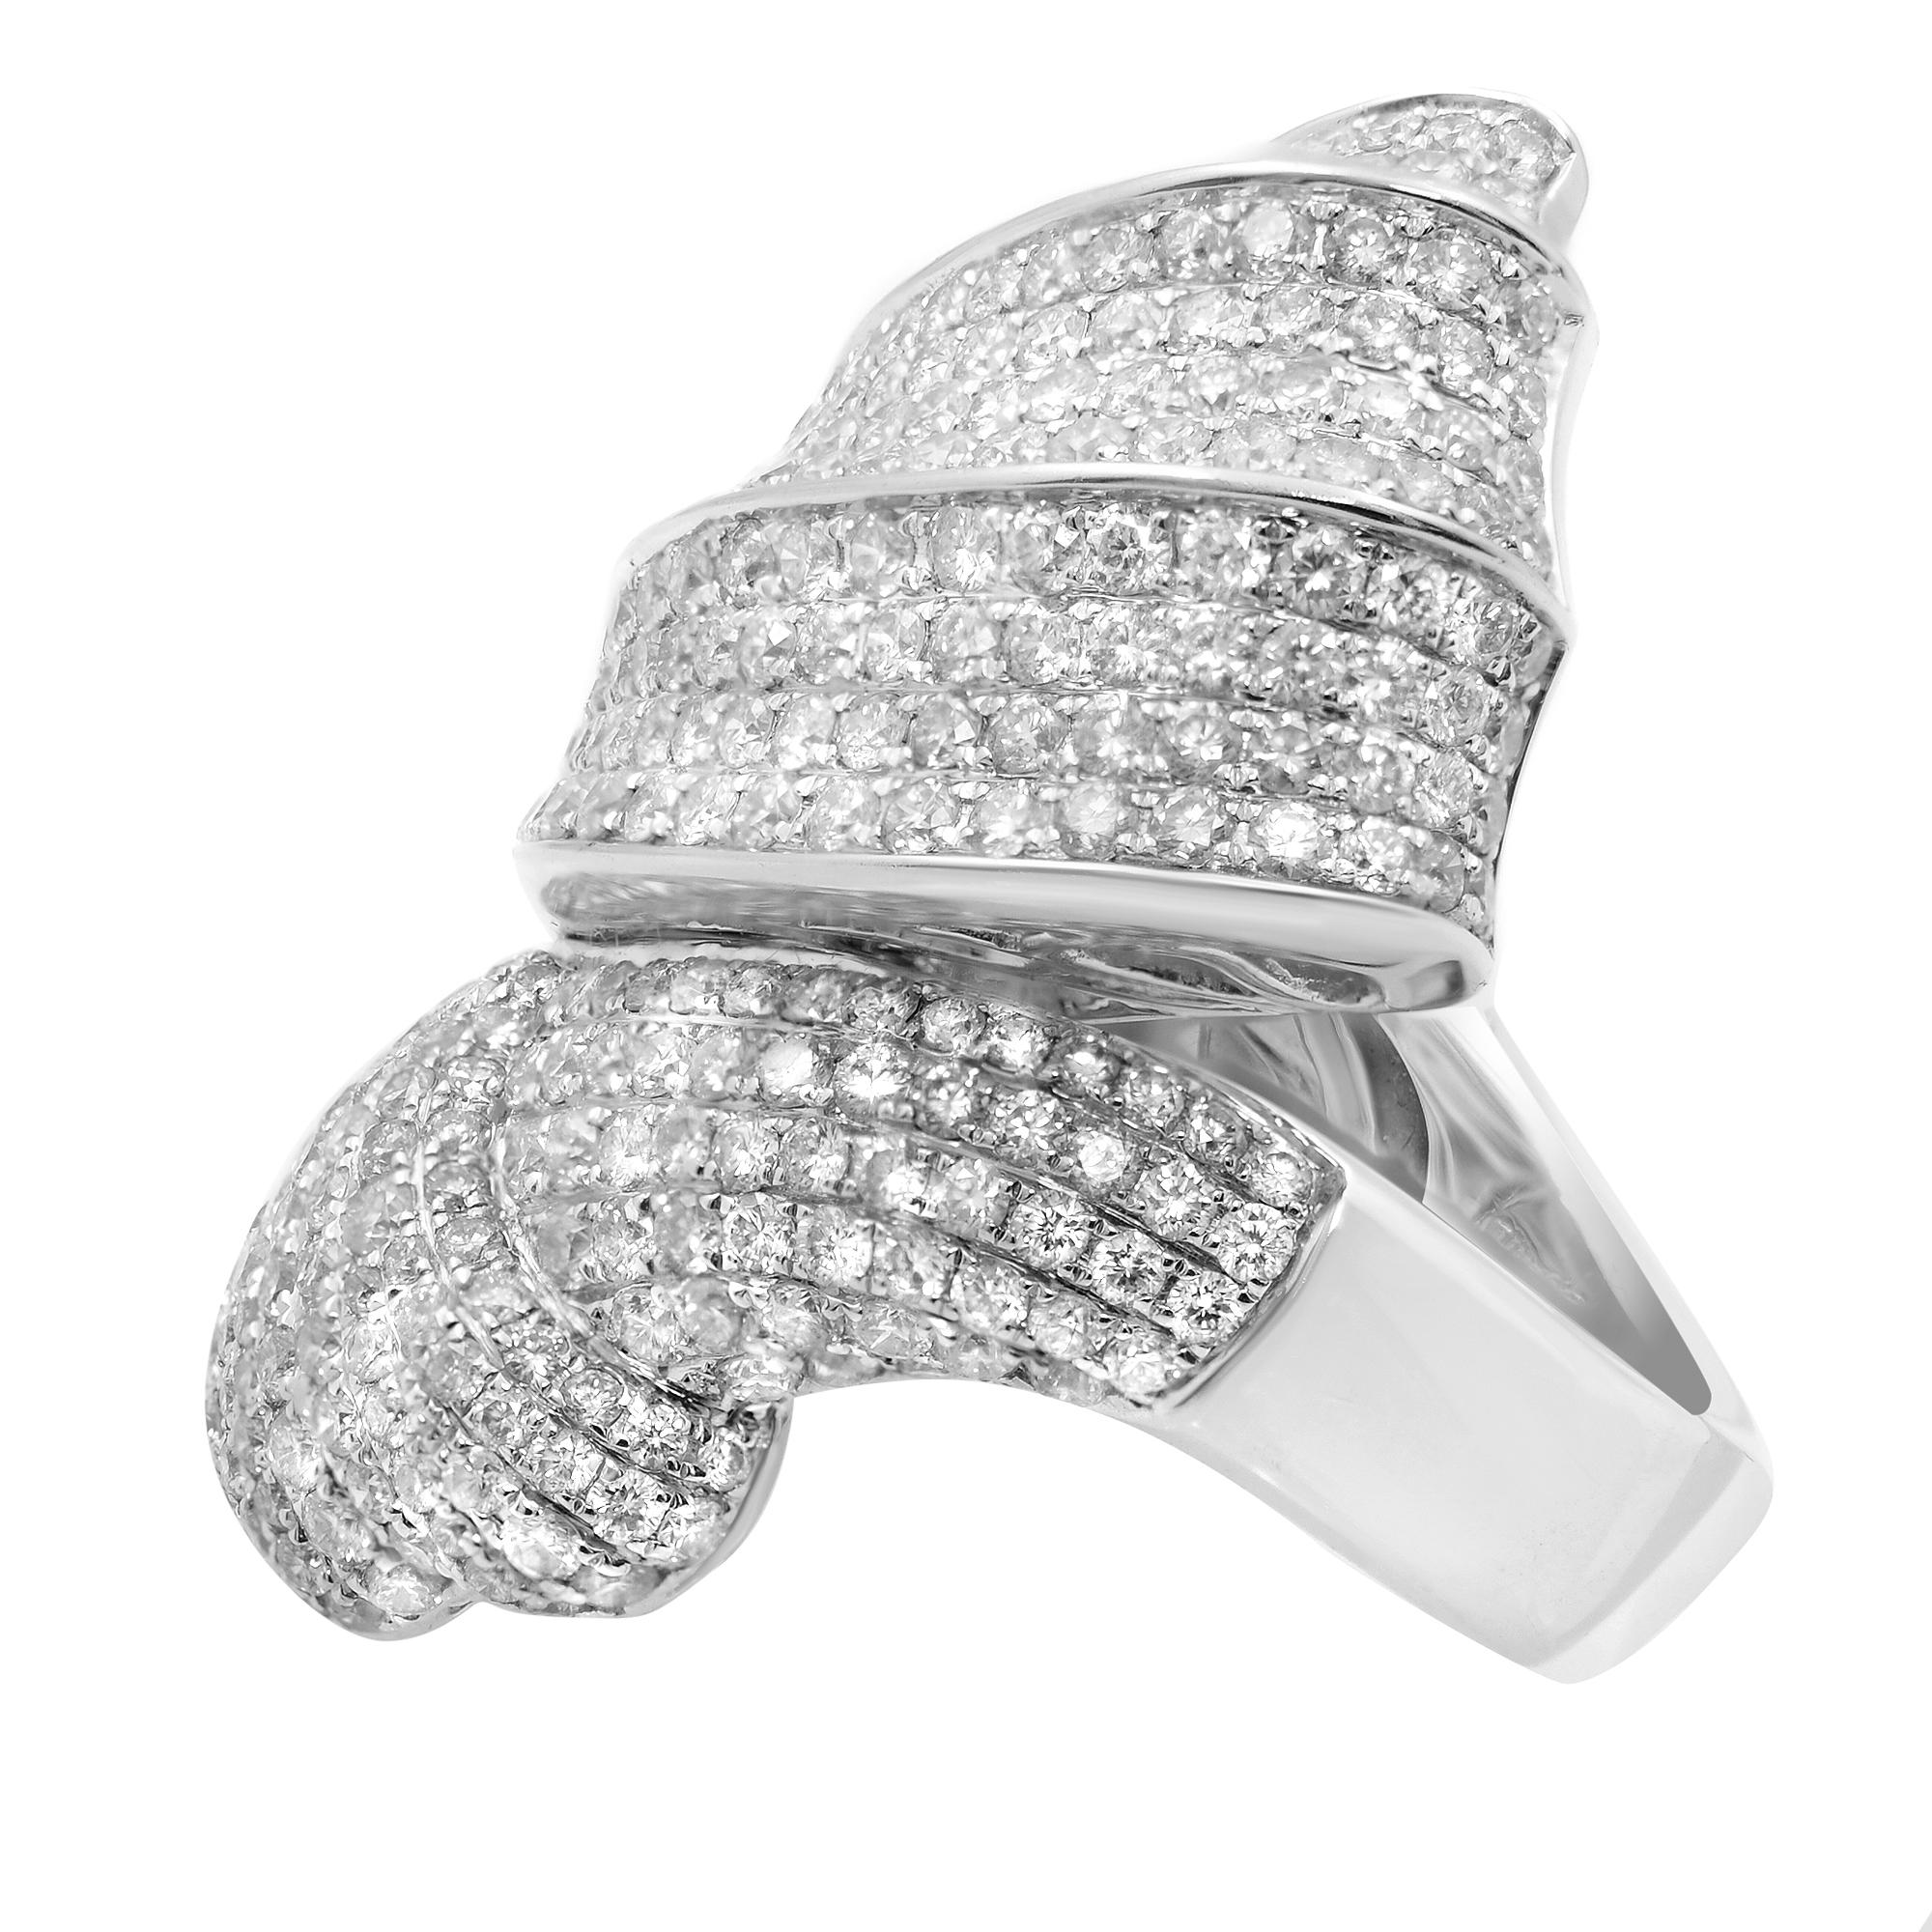 This beautiful diamond cocktail ring is set with rows of numerous round diamonds. Total diamond carat weight is approximately 4.50 with G color and VS clarity. Crafted in 18k white gold. Ring size is 7. The top measurement is 39mm. Weight: 21.70